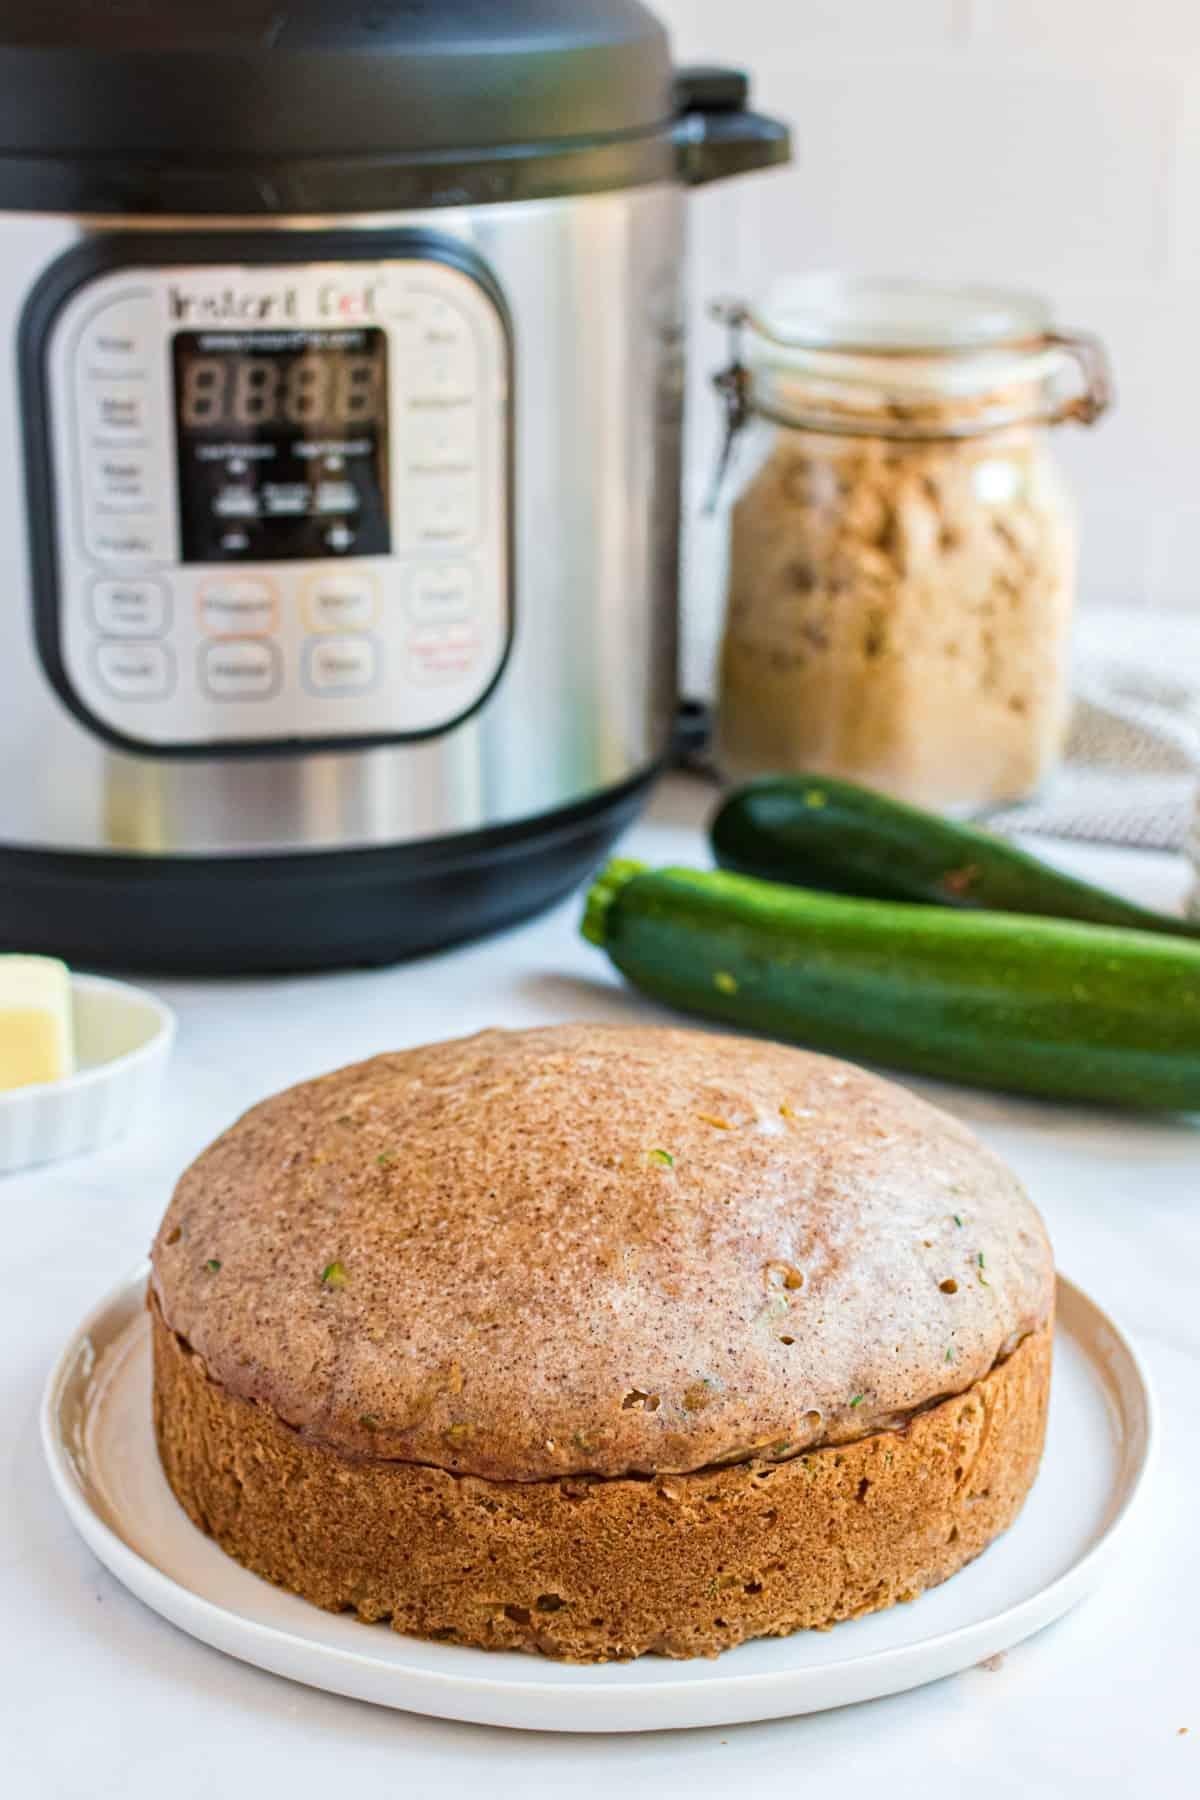 Instant Pot Zucchini Bread from Shugary Sweets